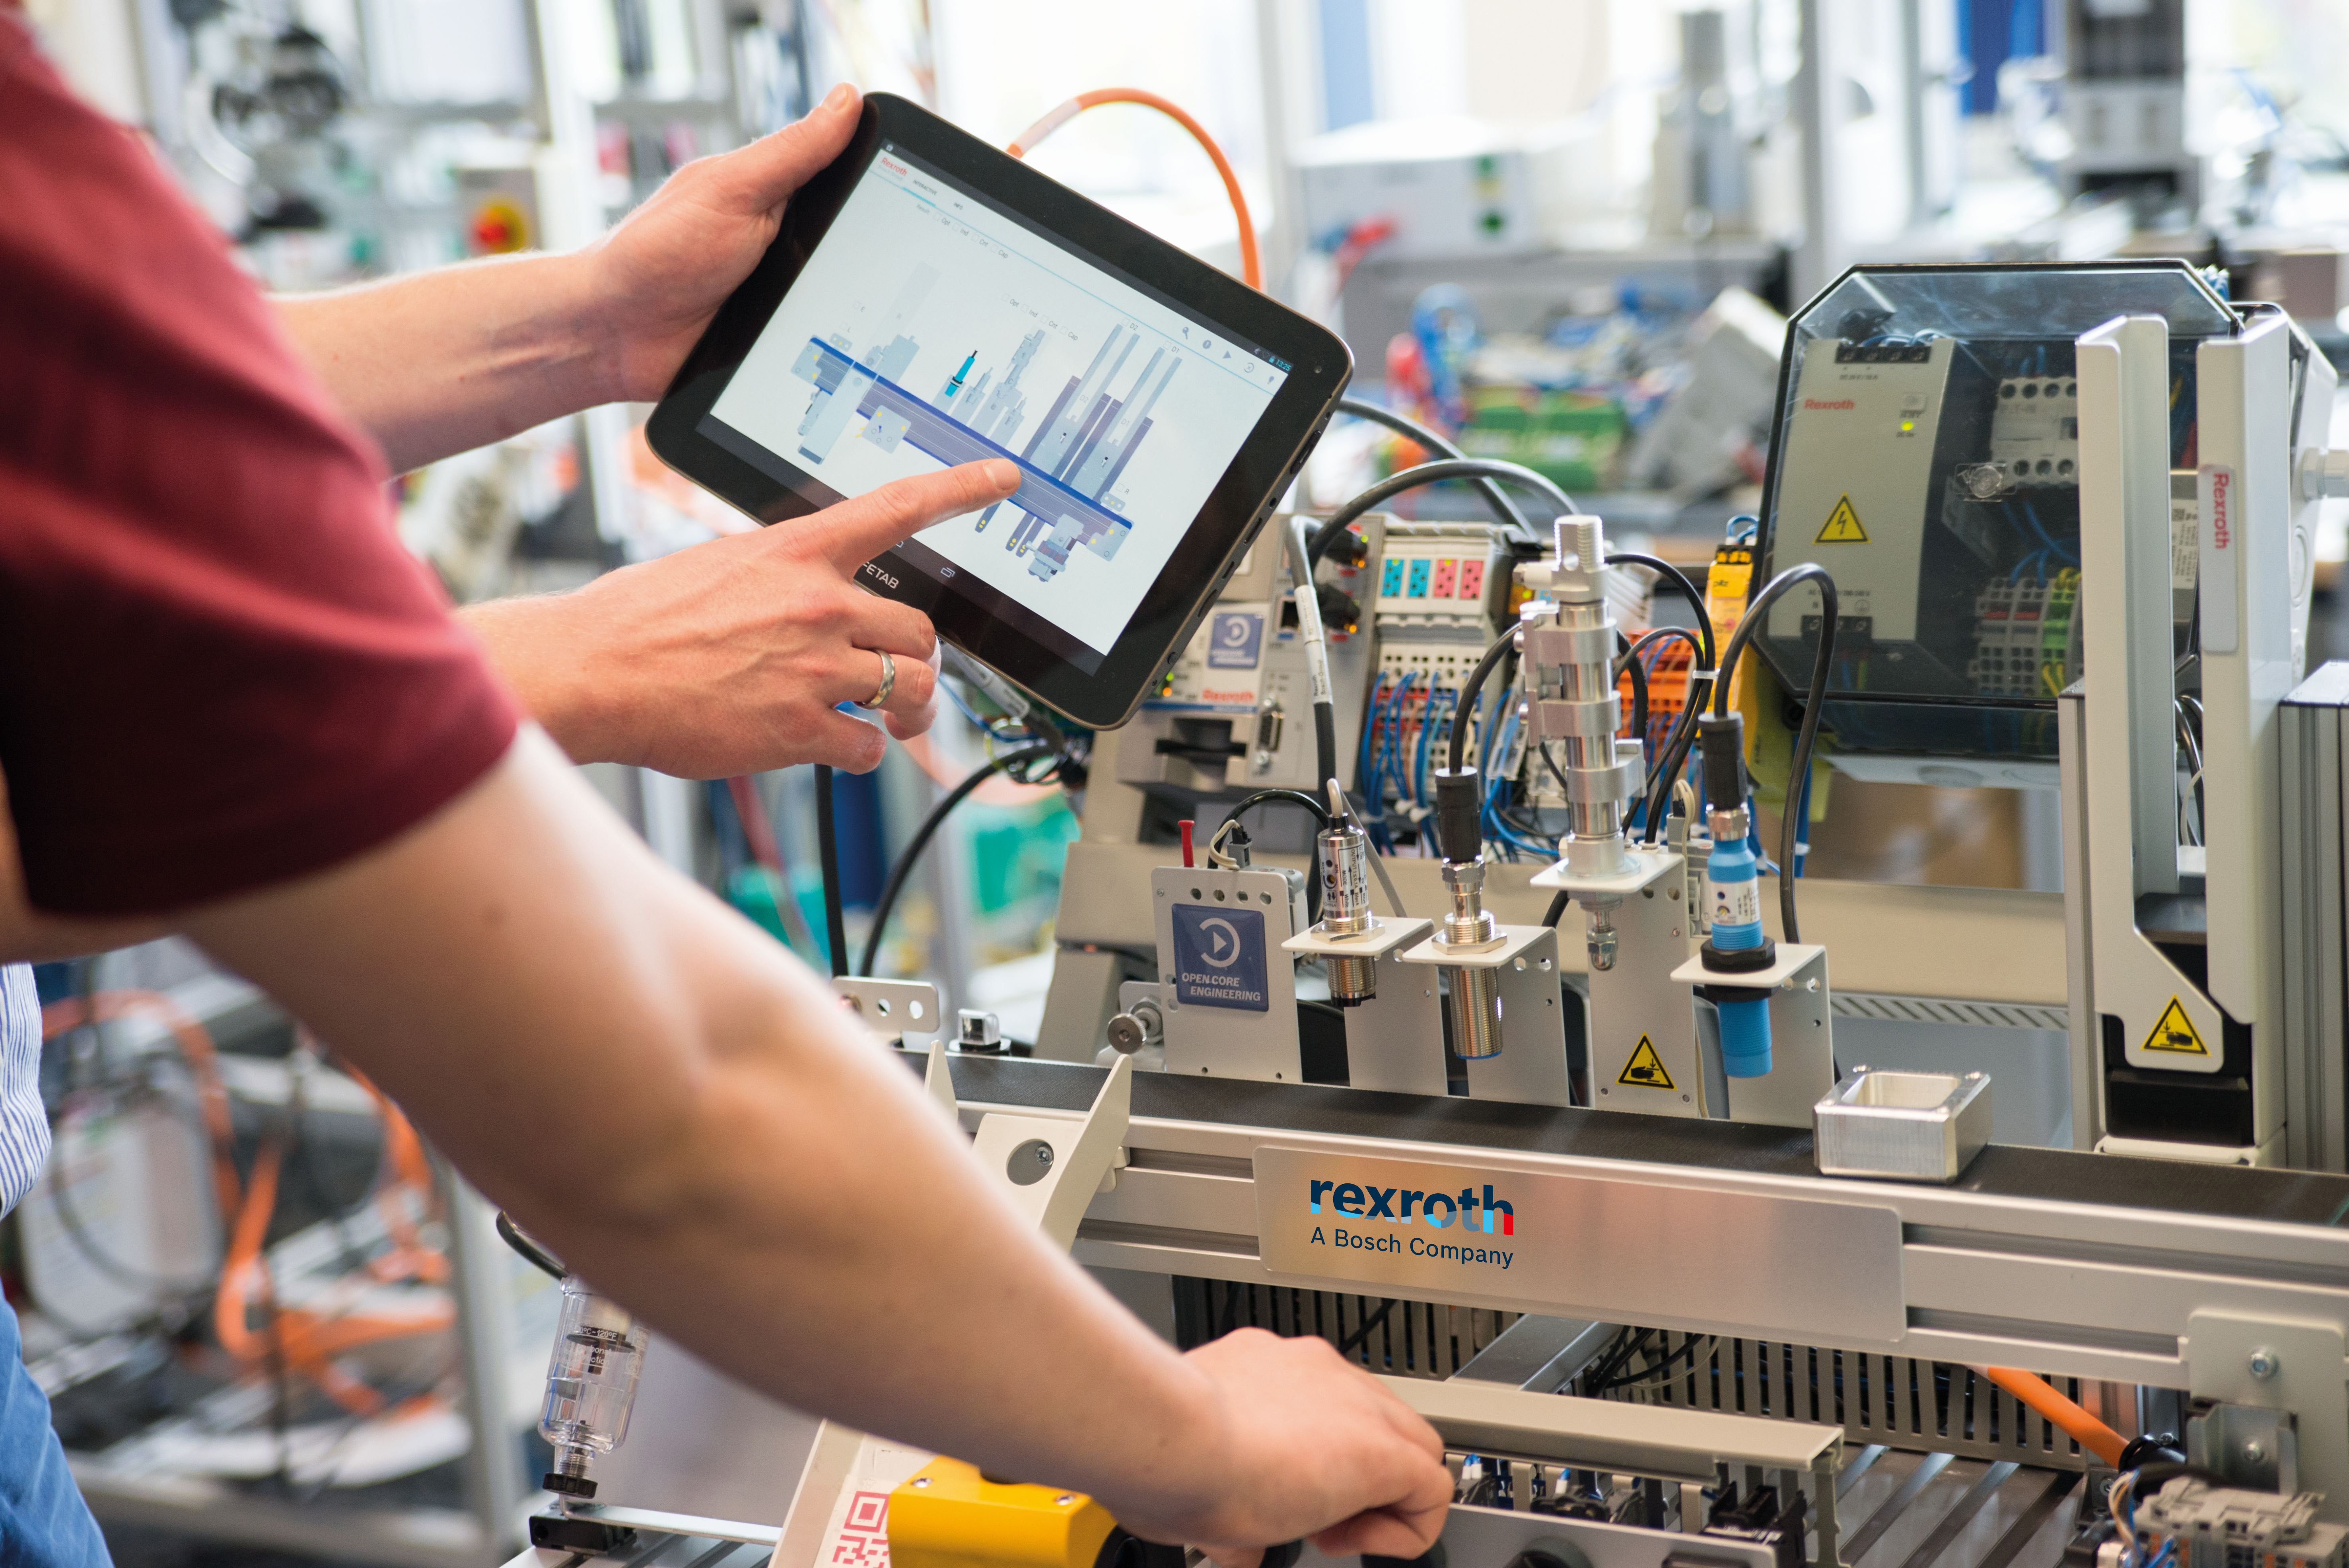 Training systems for Industry 4.0